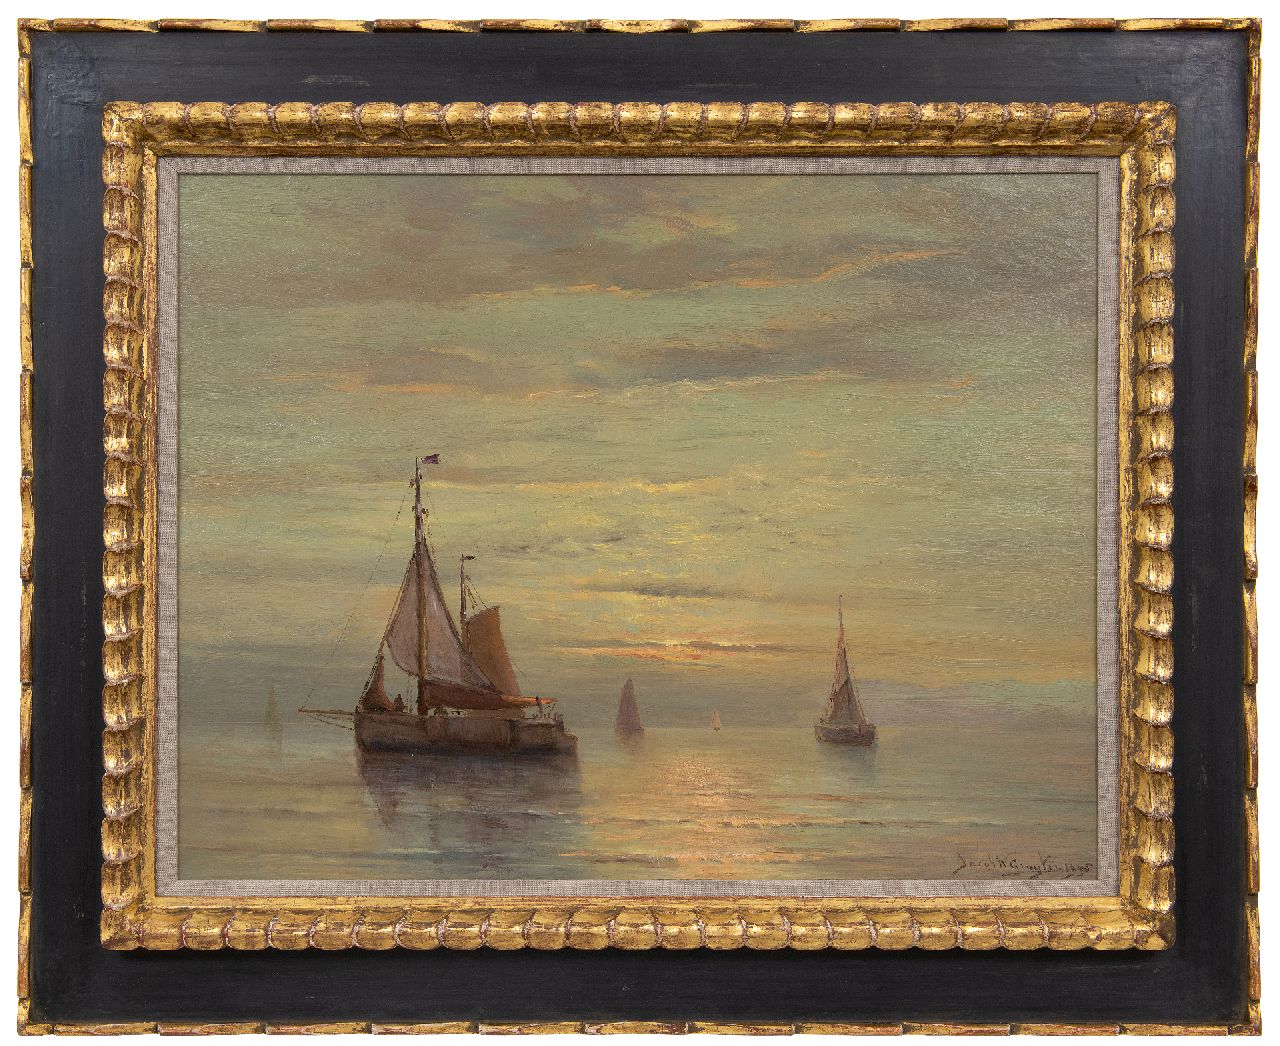 Gruijter J.W.  | Jacob Willem Gruijter | Paintings offered for sale | Ships in a calm at sunset, oil on panel 50.4 x 65.0 cm, signed l.r. and dated 1905